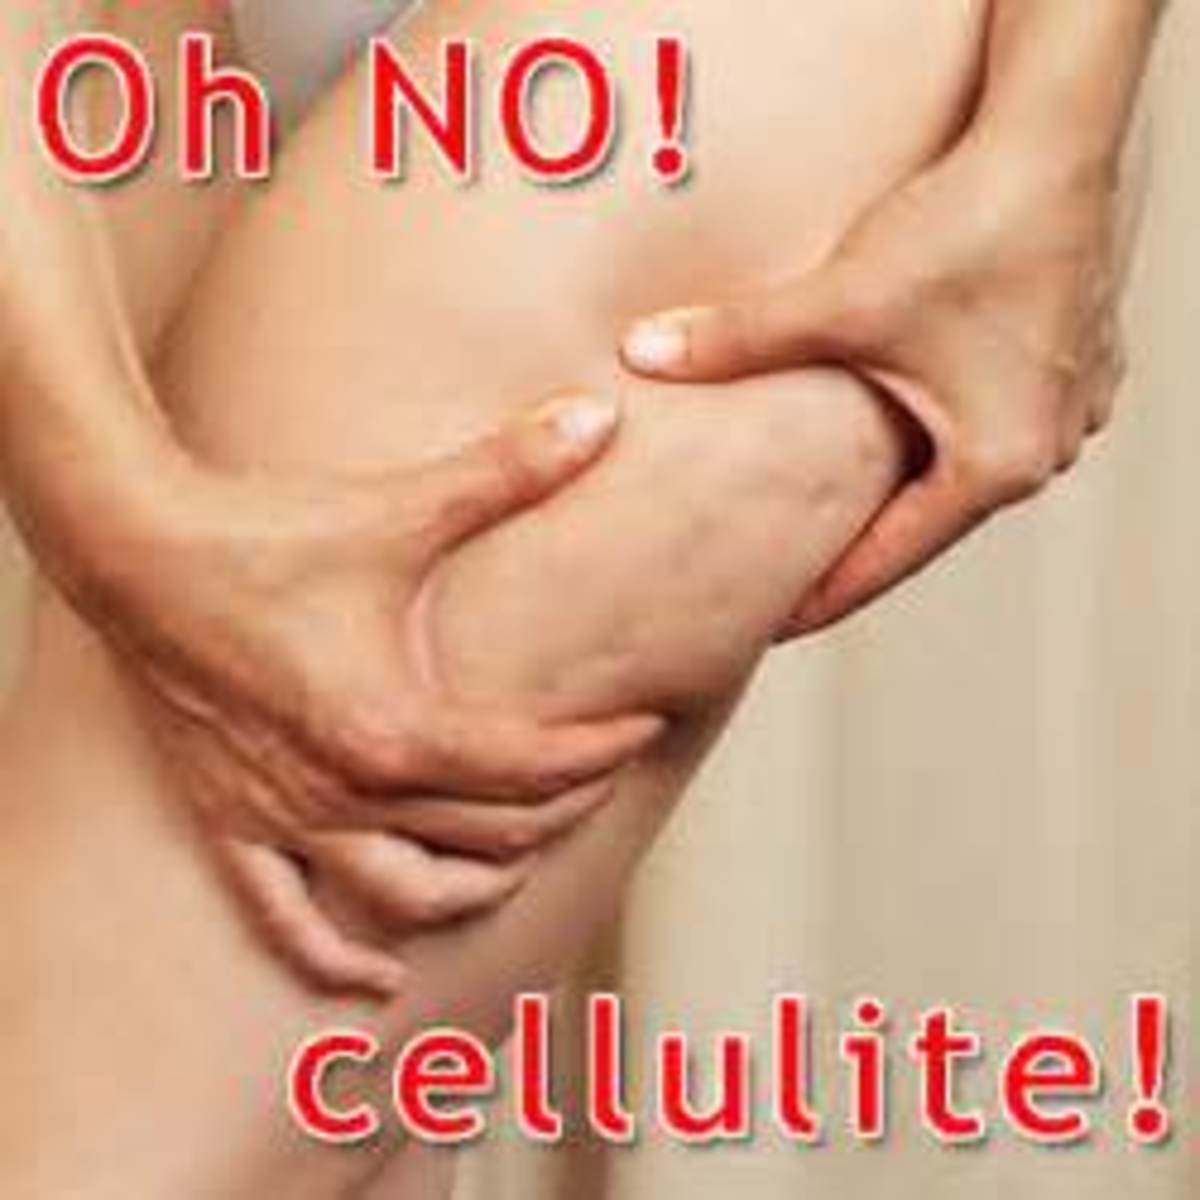 Popular myths on Cellulite: Fighting the cottage cheese